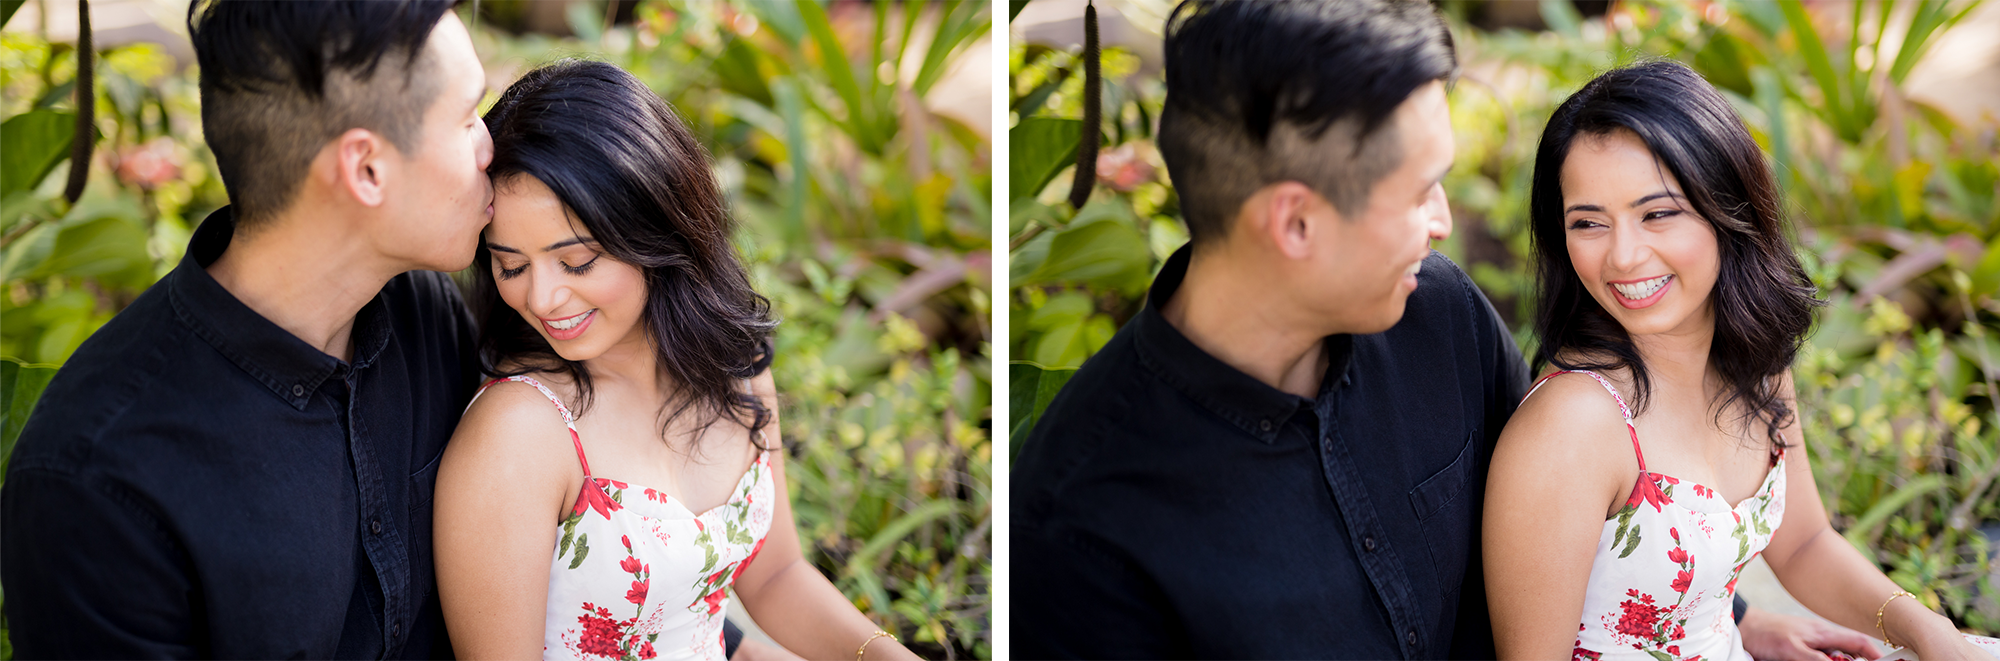 5-AJ-Sherman-Library-and-Gardens-Corona-Del-Mar-Engagement-Photos-Andrew-Kwak-Photography.png